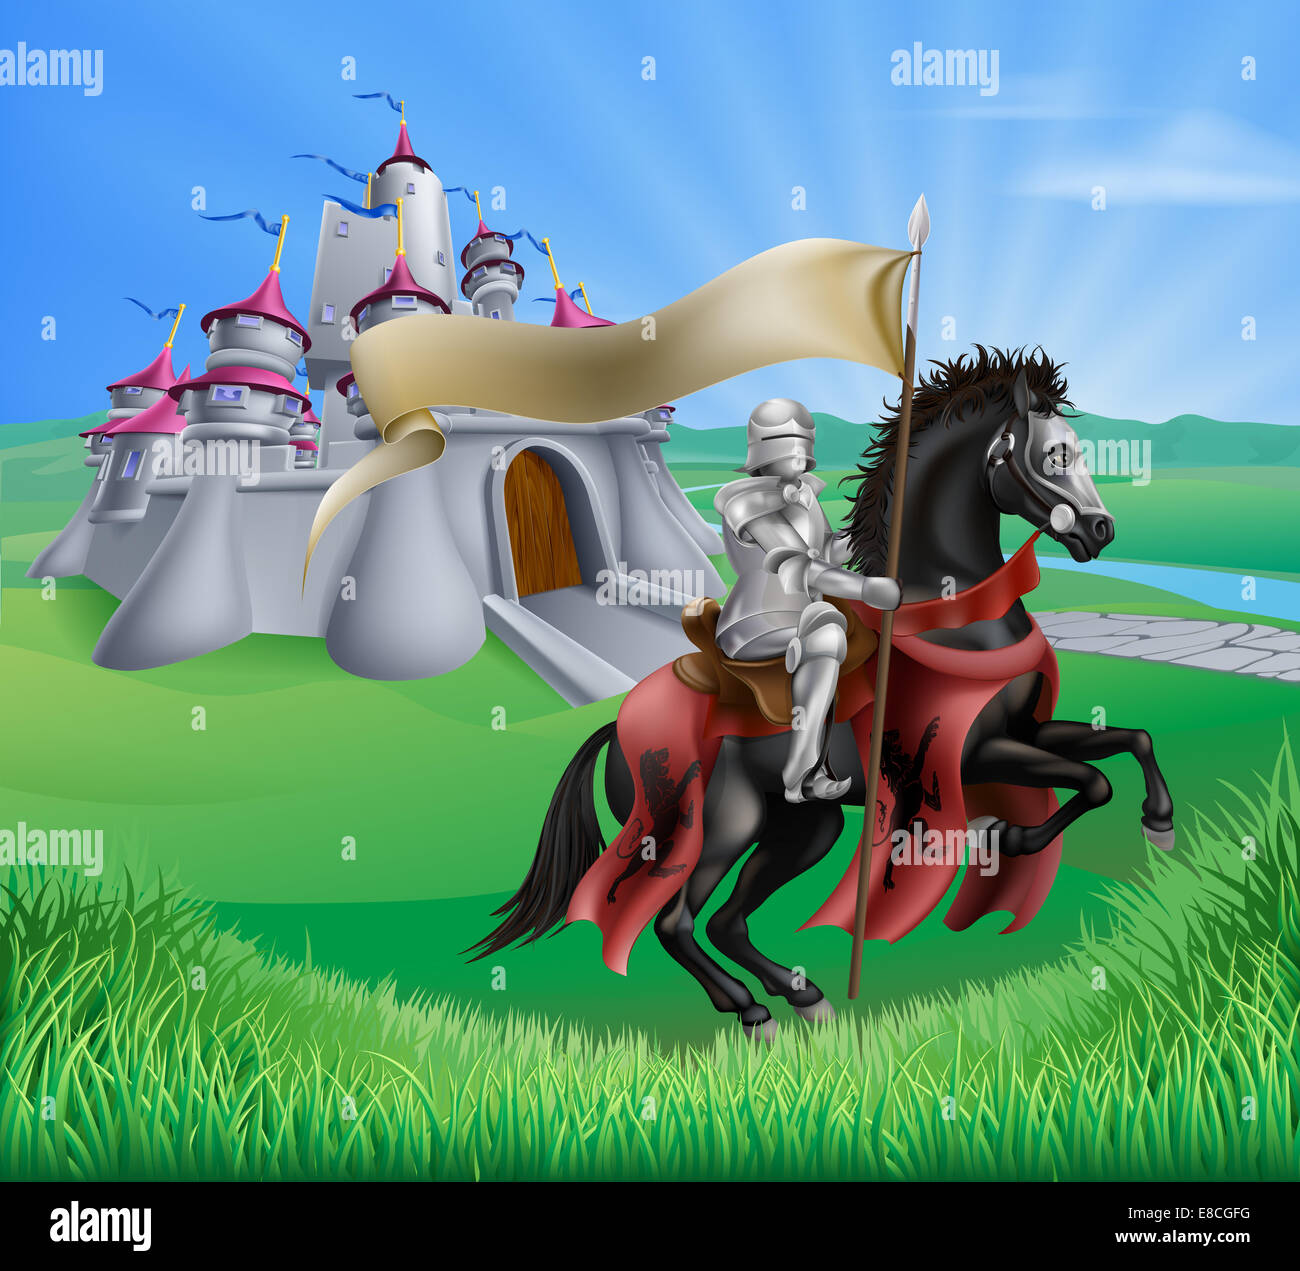 An illustration of a knight with a banner on his horse and a fantasy fairytale medieval castle in a landscape of rolling hills Stock Photo